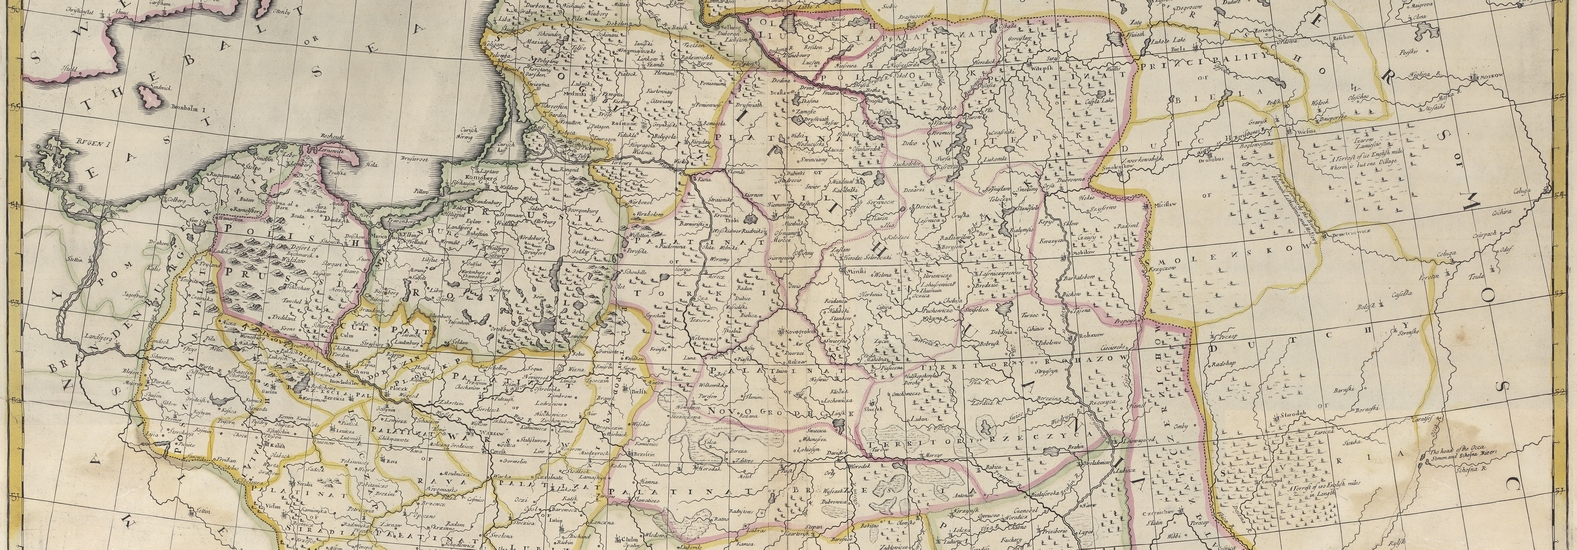 slice of an 1712 map 
of Poland - showing the Gdansk area and running east